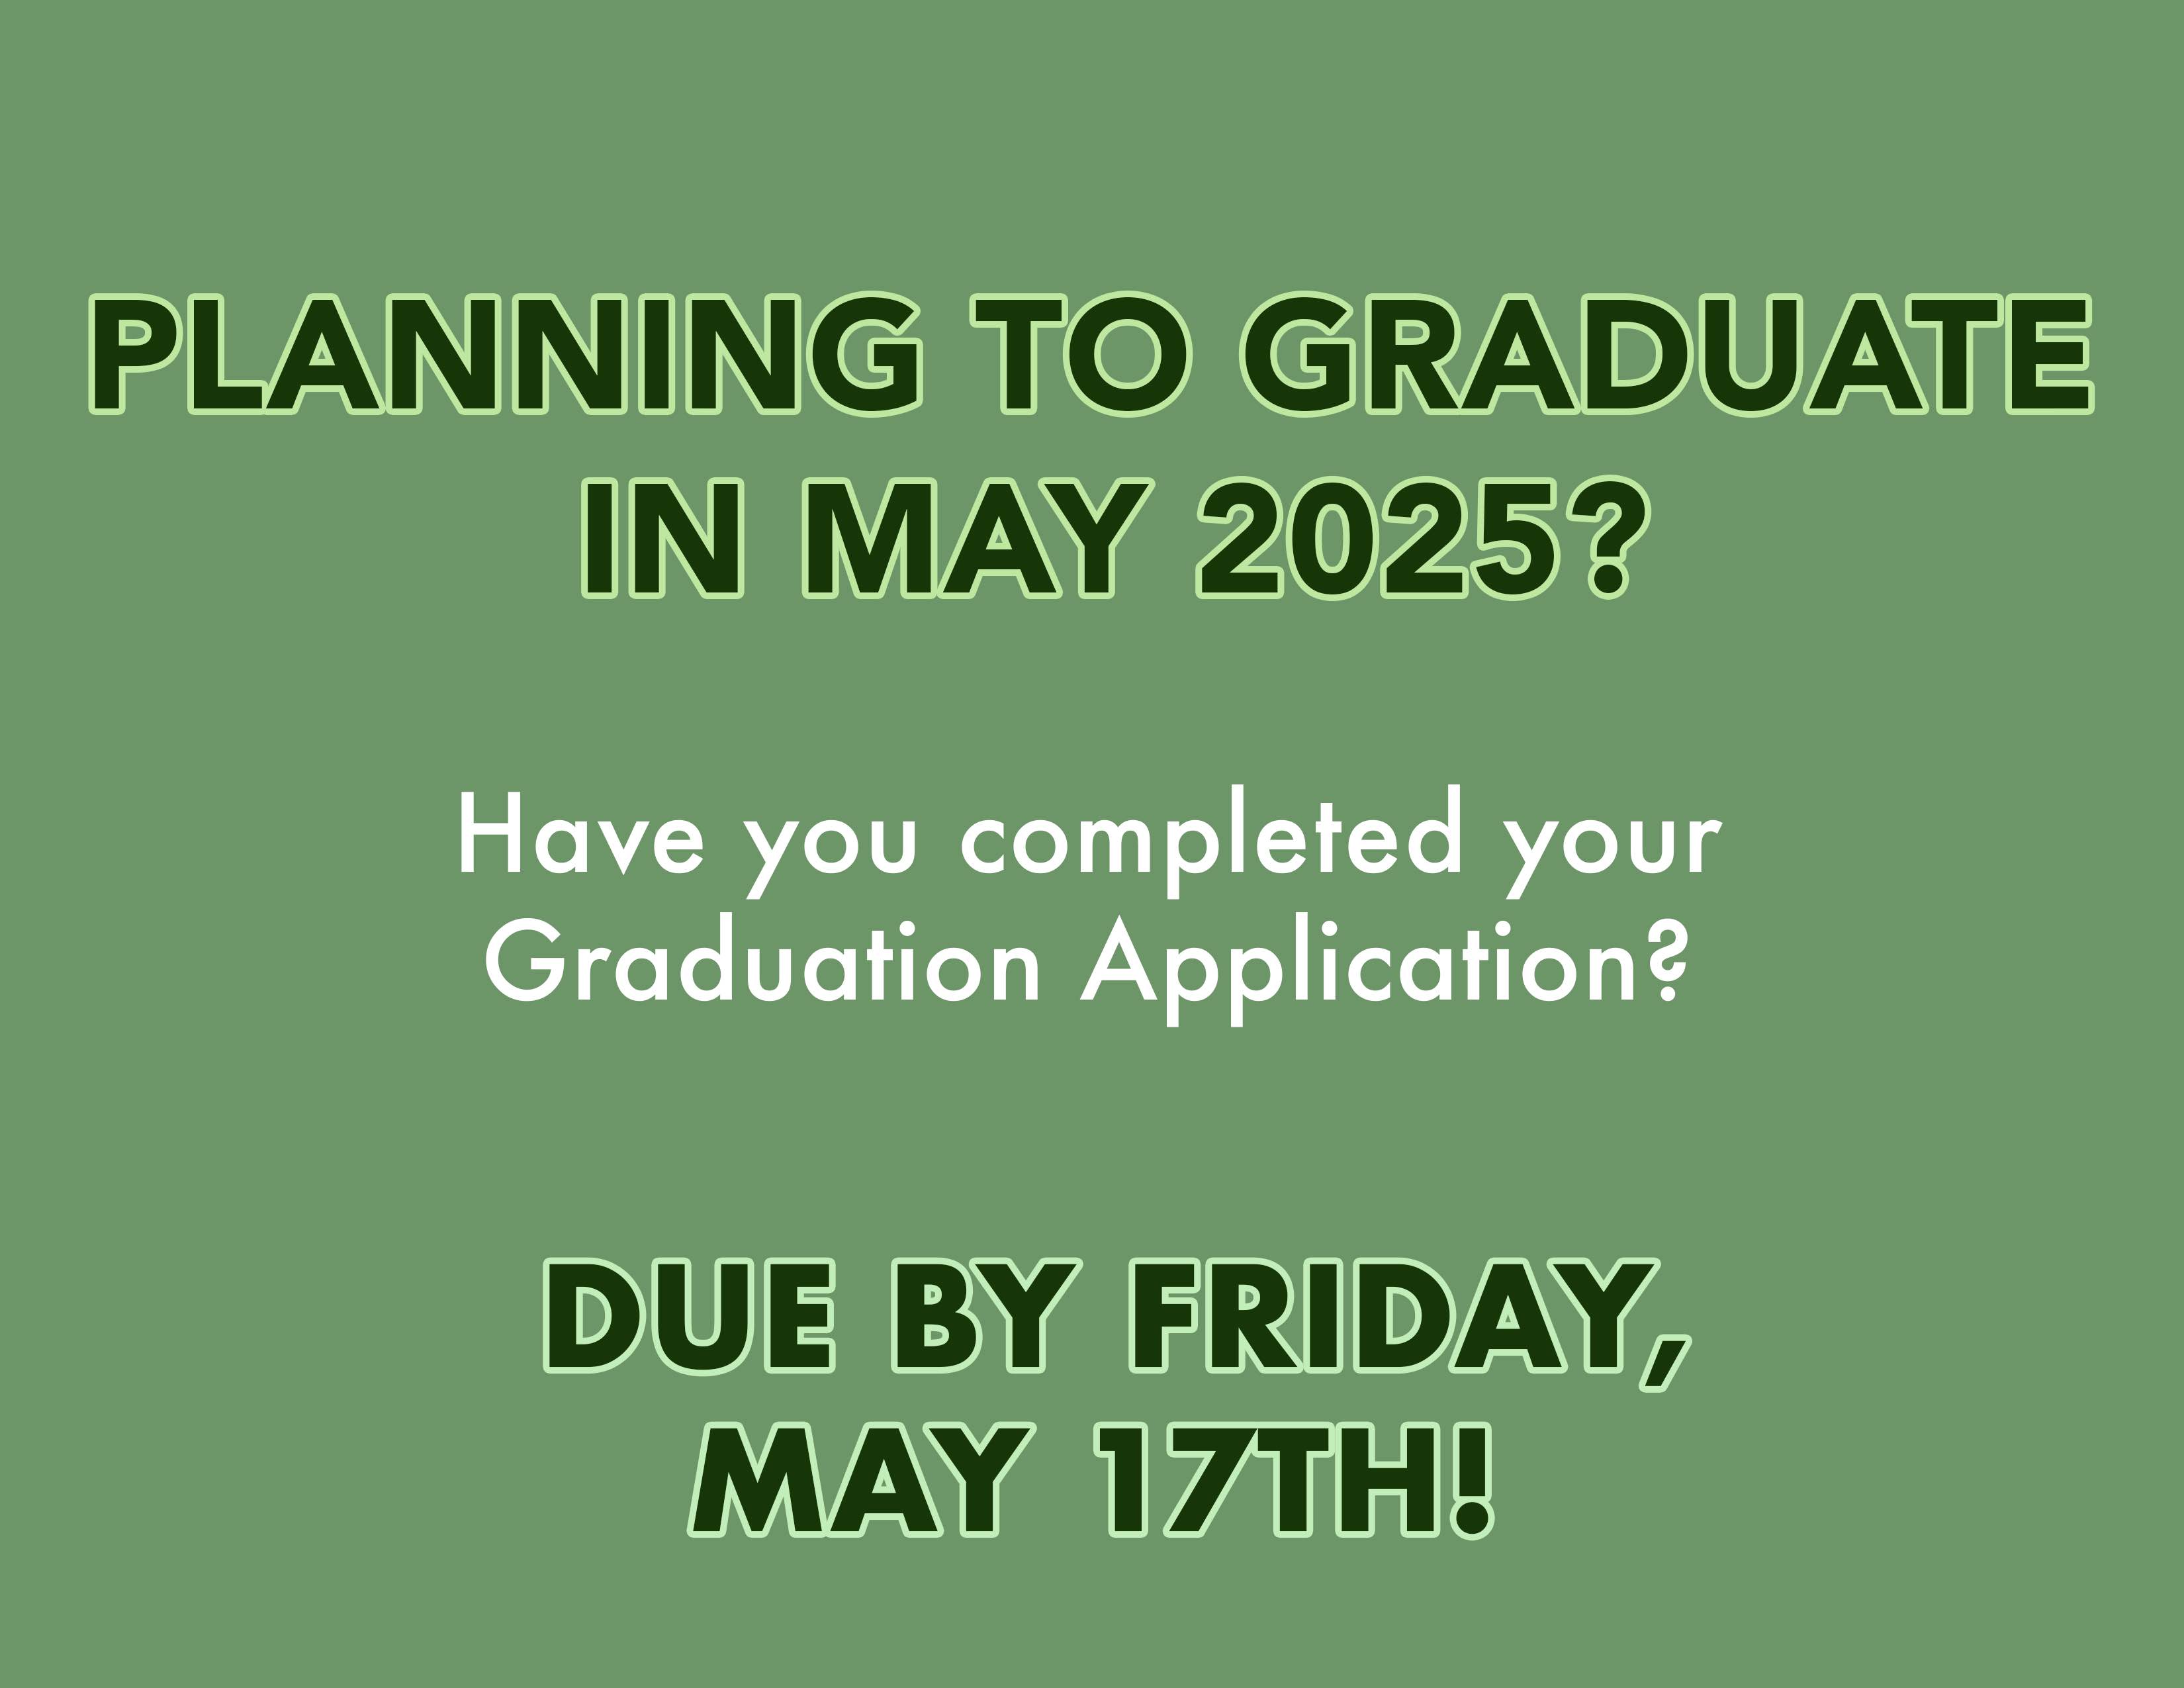 Planning to Graduate in May 2025?